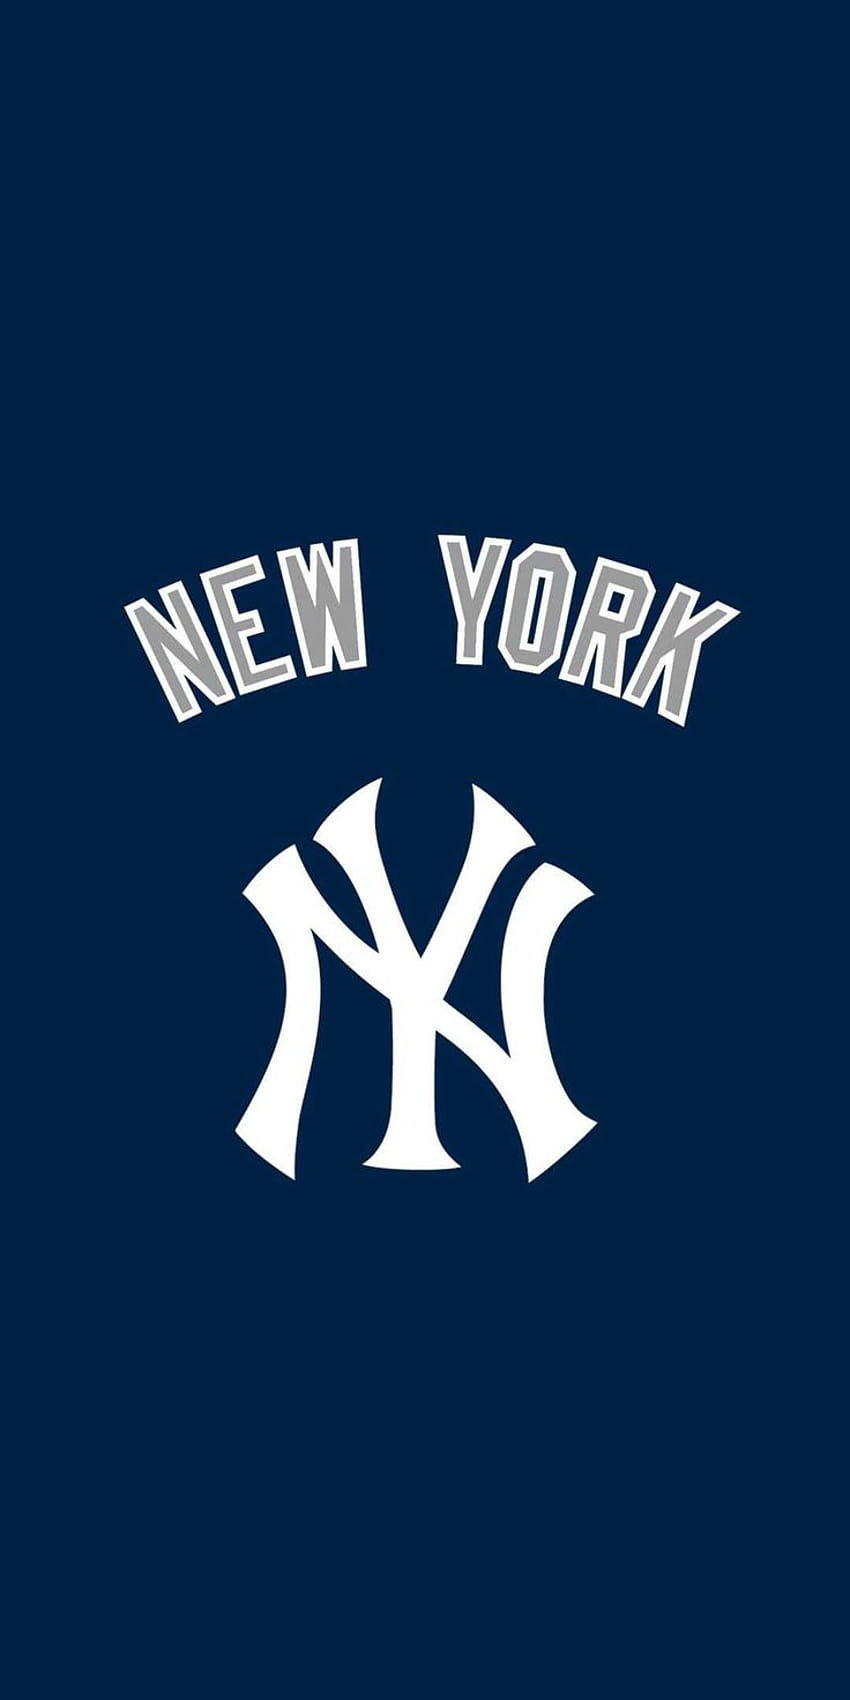 Share more than 81 yankees phone wallpaper latest - in.cdgdbentre